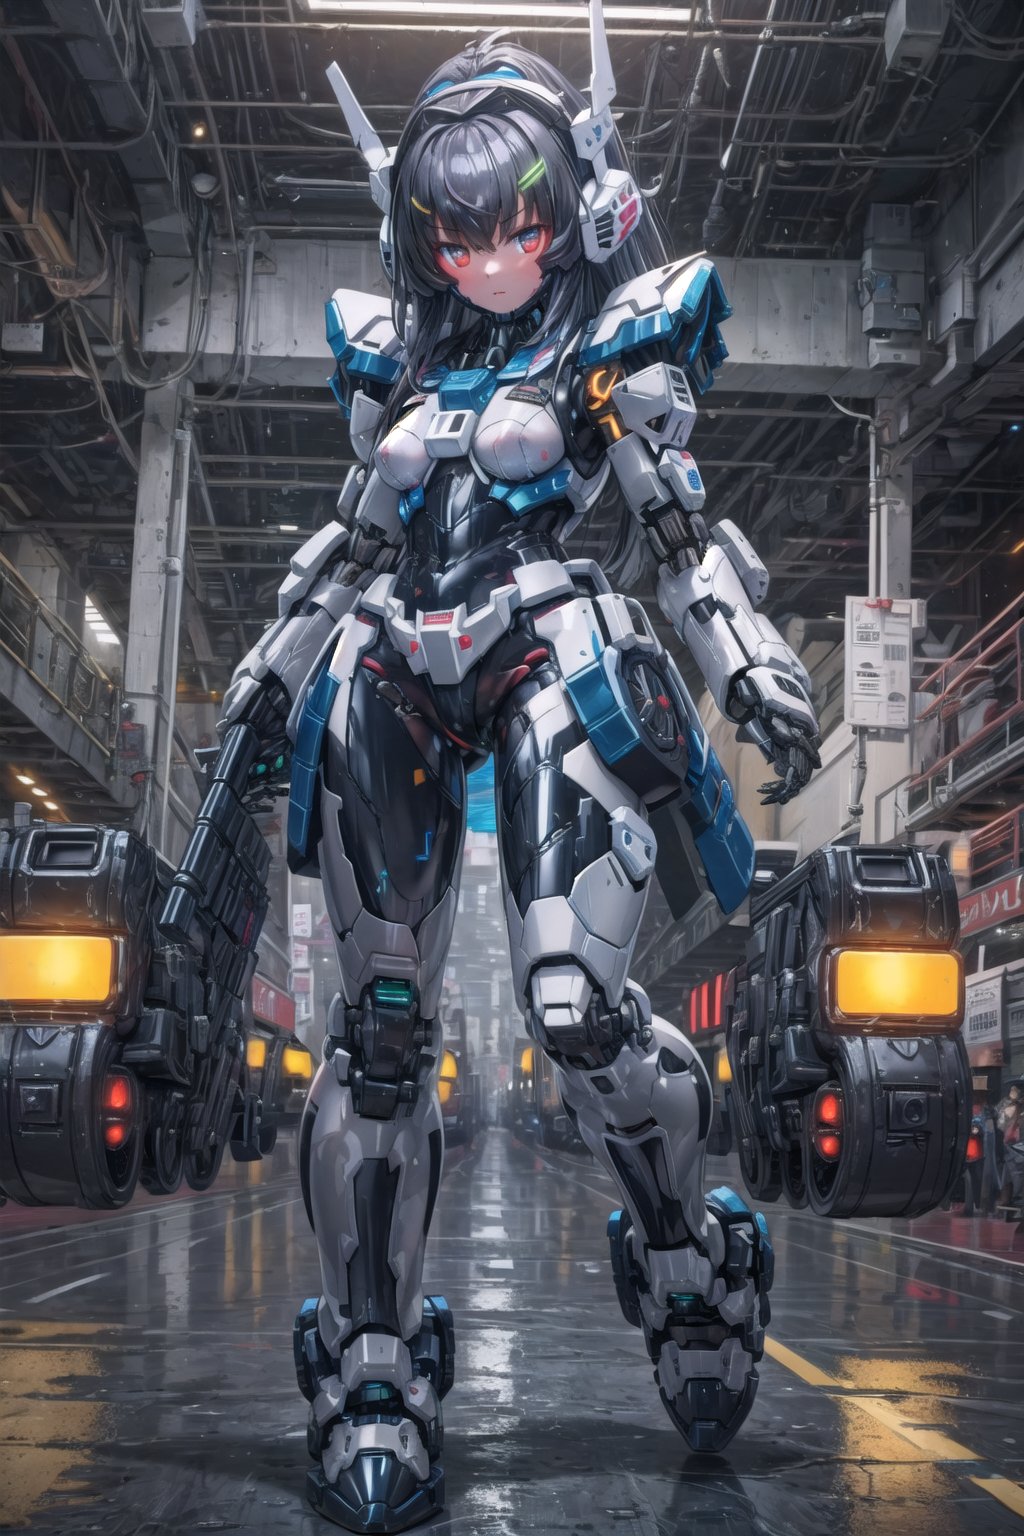 ((Synthetic rubber material Matte material), (1girl)), (ROBOT VEHICLE 1), (sole_female), (a detailed face), (cyborg girl),  (expressionless), (white teeth)), ((Full body shot)), (cyborg type city background), (whitecolor), (precision near-future illumination), (big picture) ,3d style, cyborg style, high quality, realistic, mecha musume, robot, (I filmed myself flying in the sky at a speed of about 100 kilometers per hour. fly 200 meters above the ground), (I'm riding a hand-wound rechargeable light type near future vehicle with 3 LED-Lites on the front), mecha musume,  (Riding in a robot, controlling and walking), mecha musume, robot, gundam, mecha,mecha musume,robot